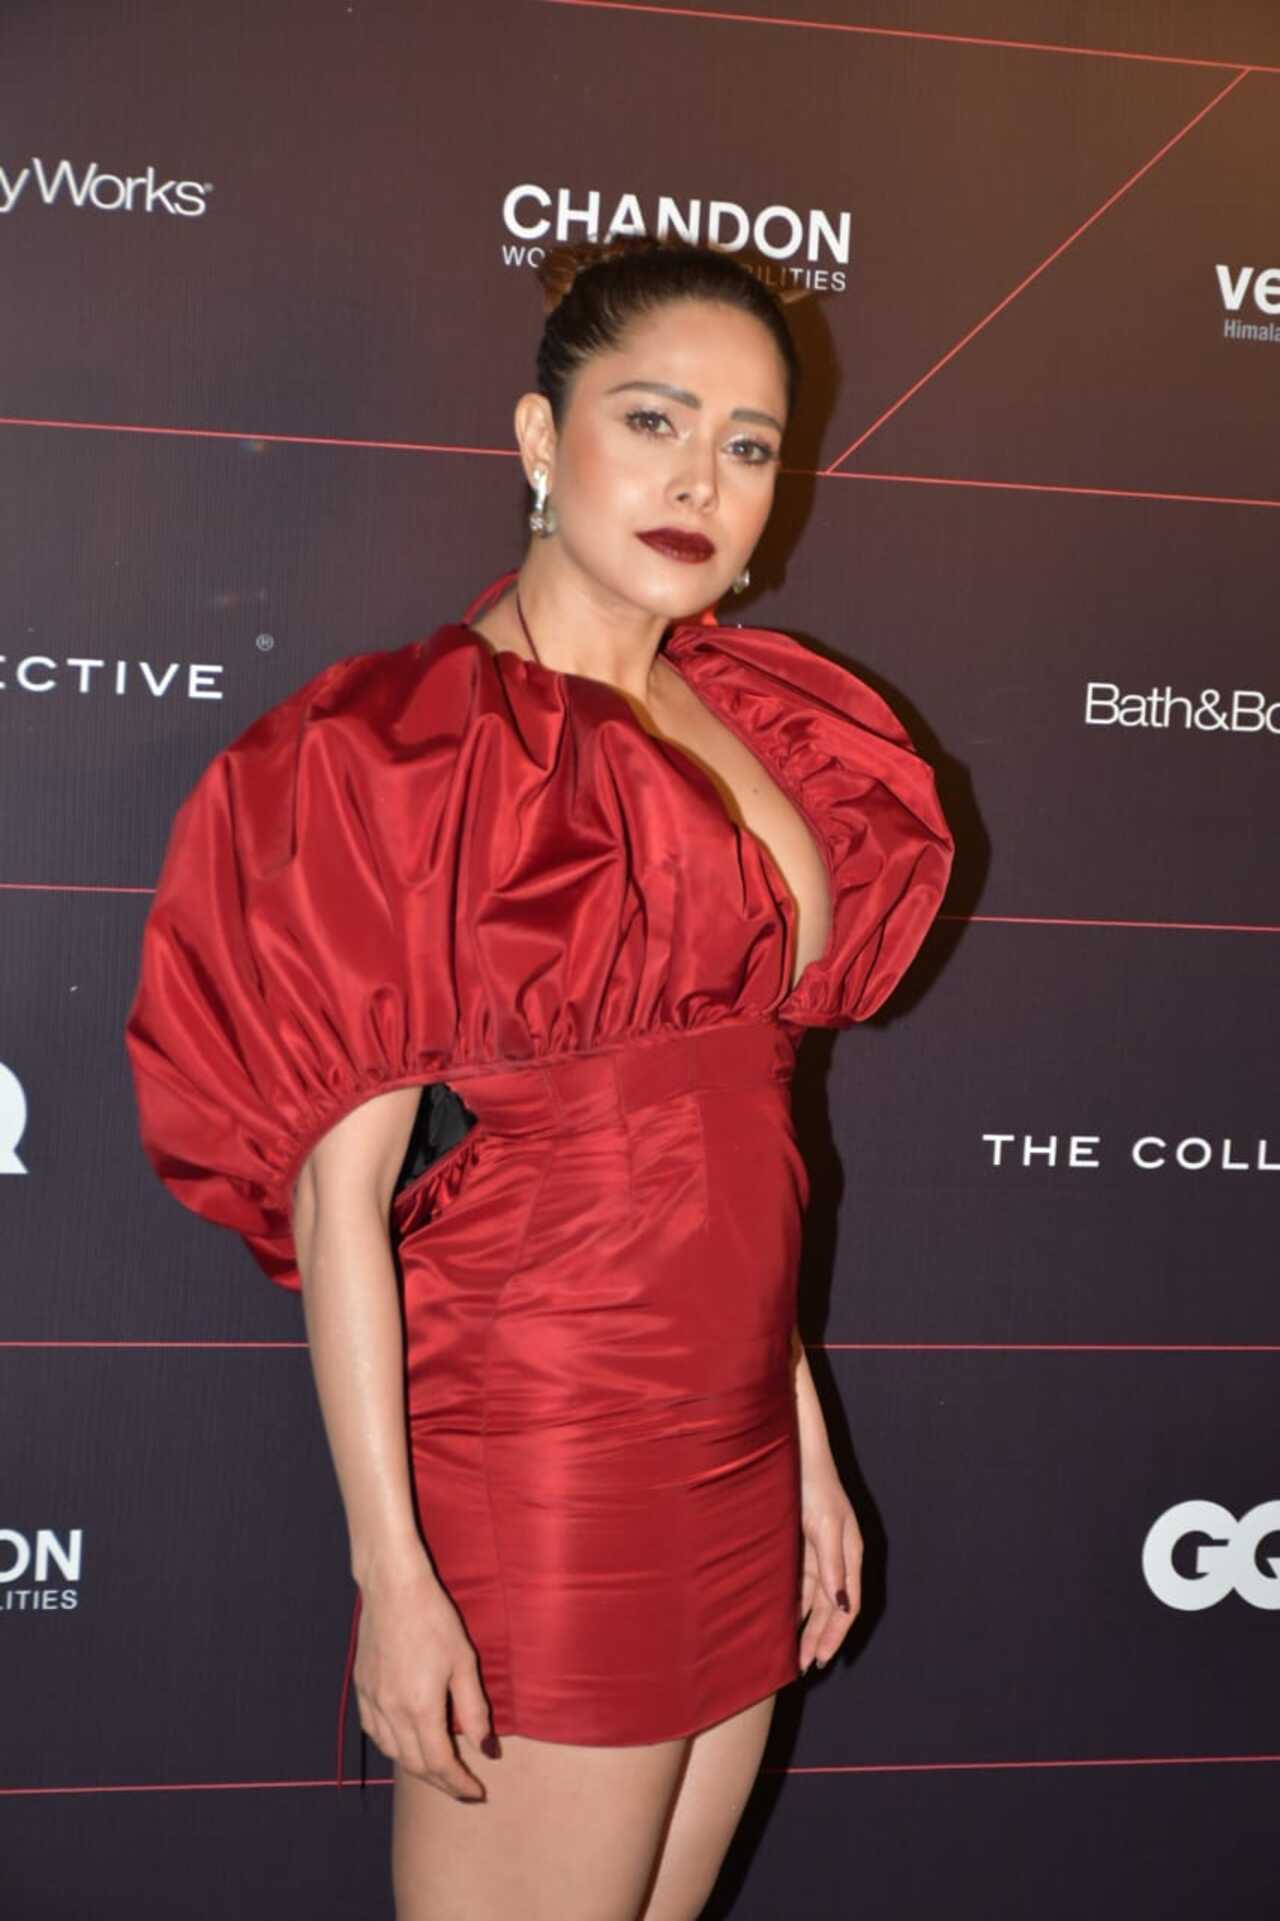 Nushrratt Bharuccha looked red hot at the event